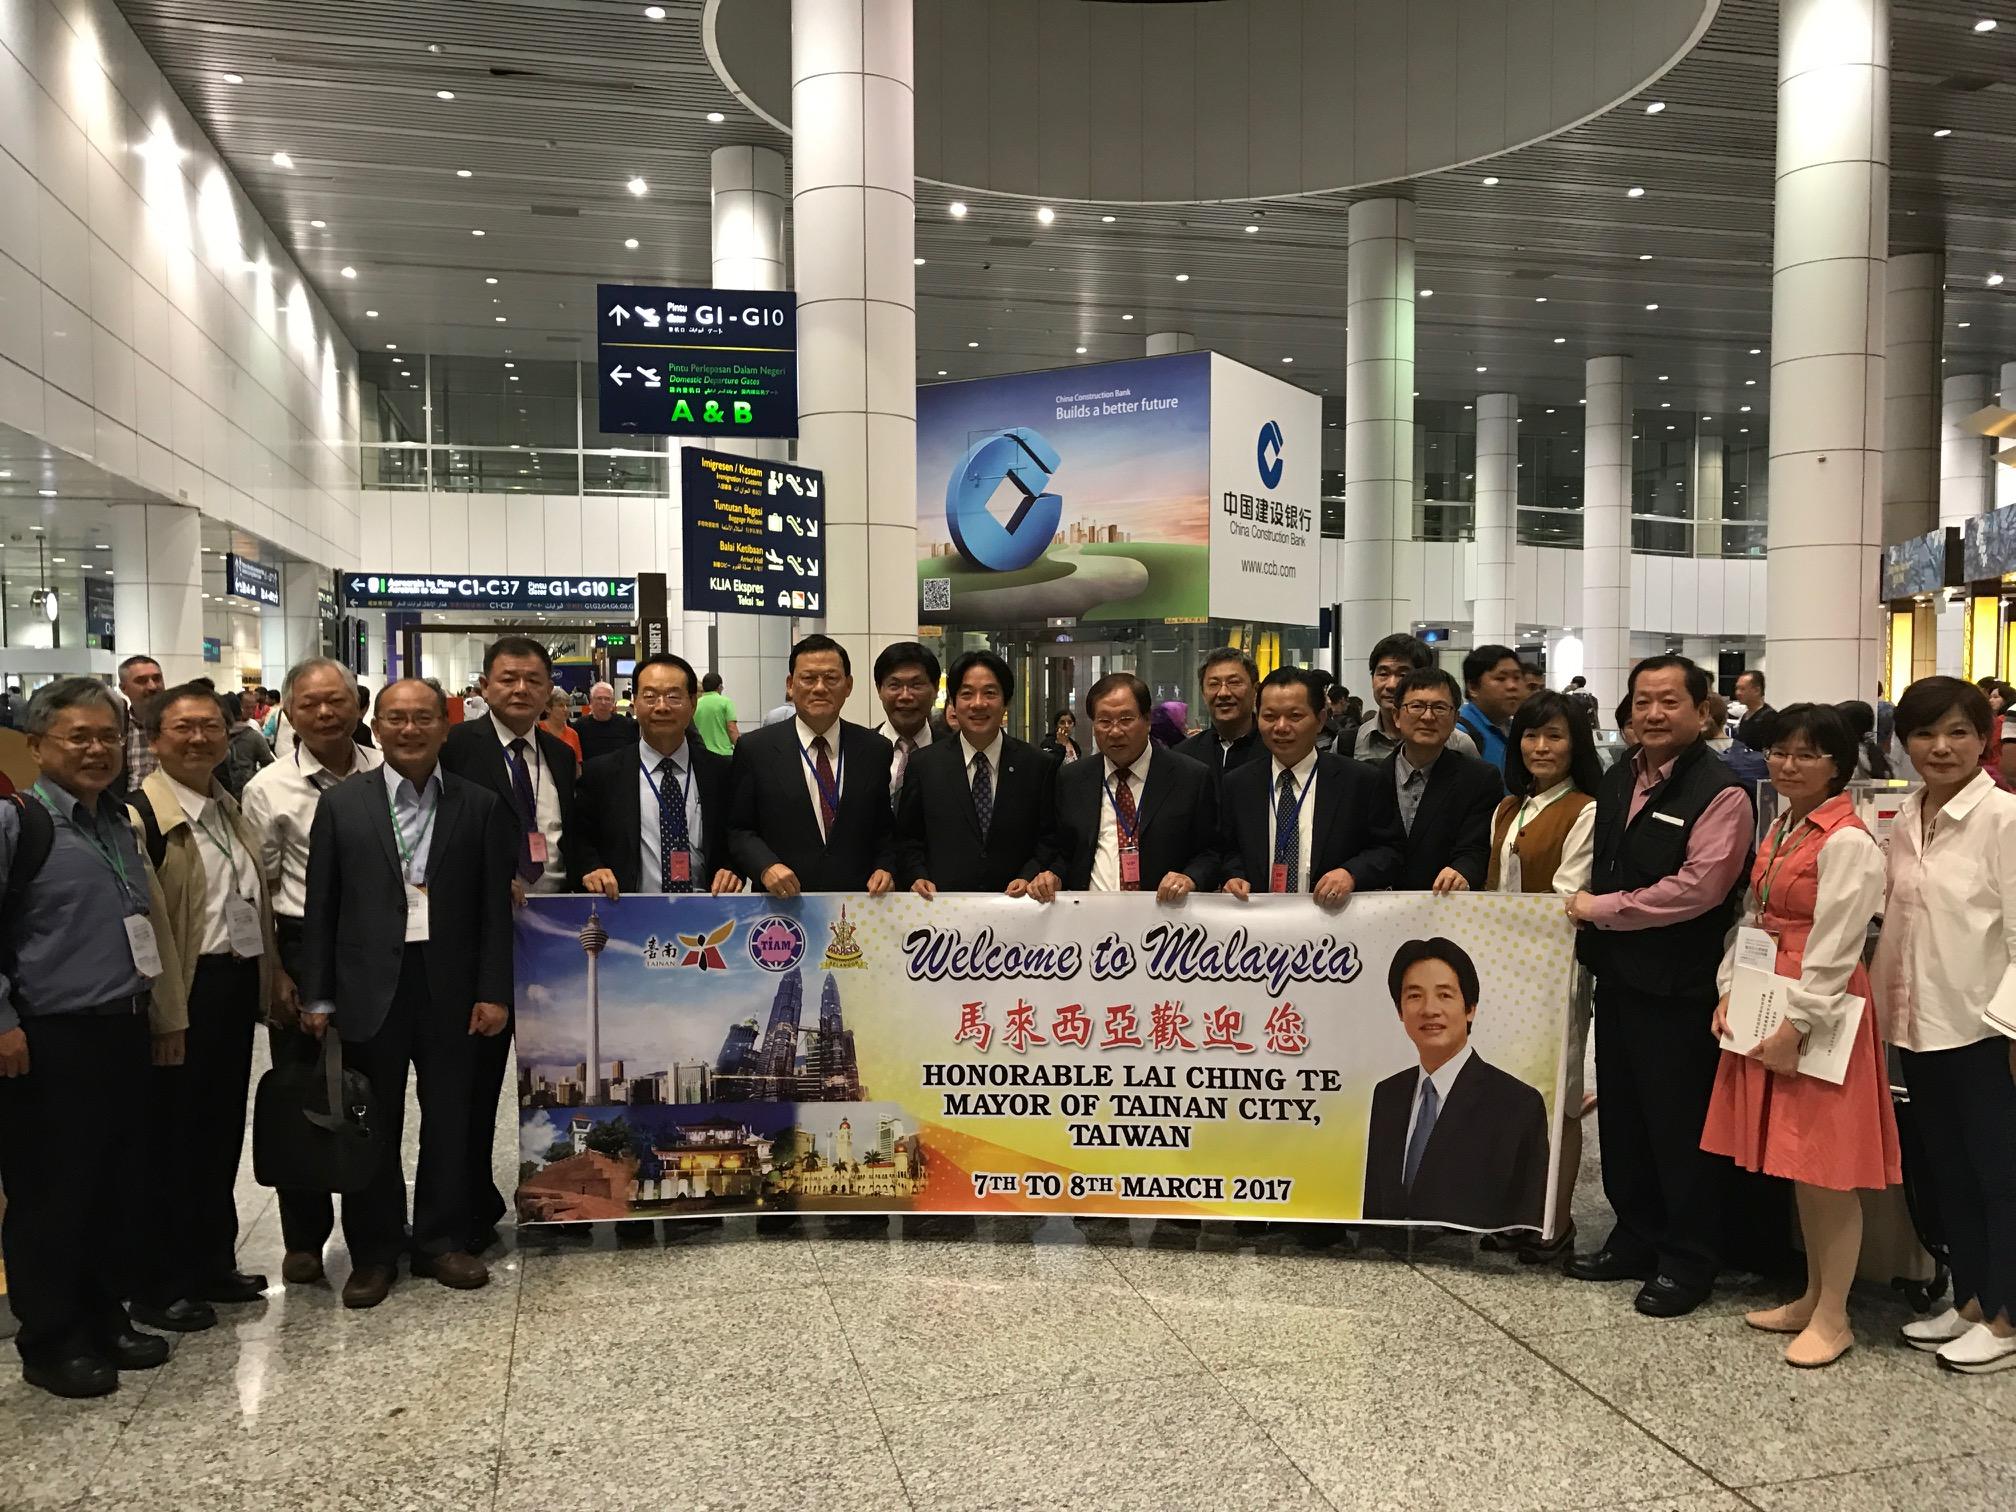 Representative Chang, James Chi-ping (seven from left) welcomes Mr. Lai Ching-te, Mayor of Tainan City (nine from left) and members from Tainan Universities Alliance visiting Malaysia.